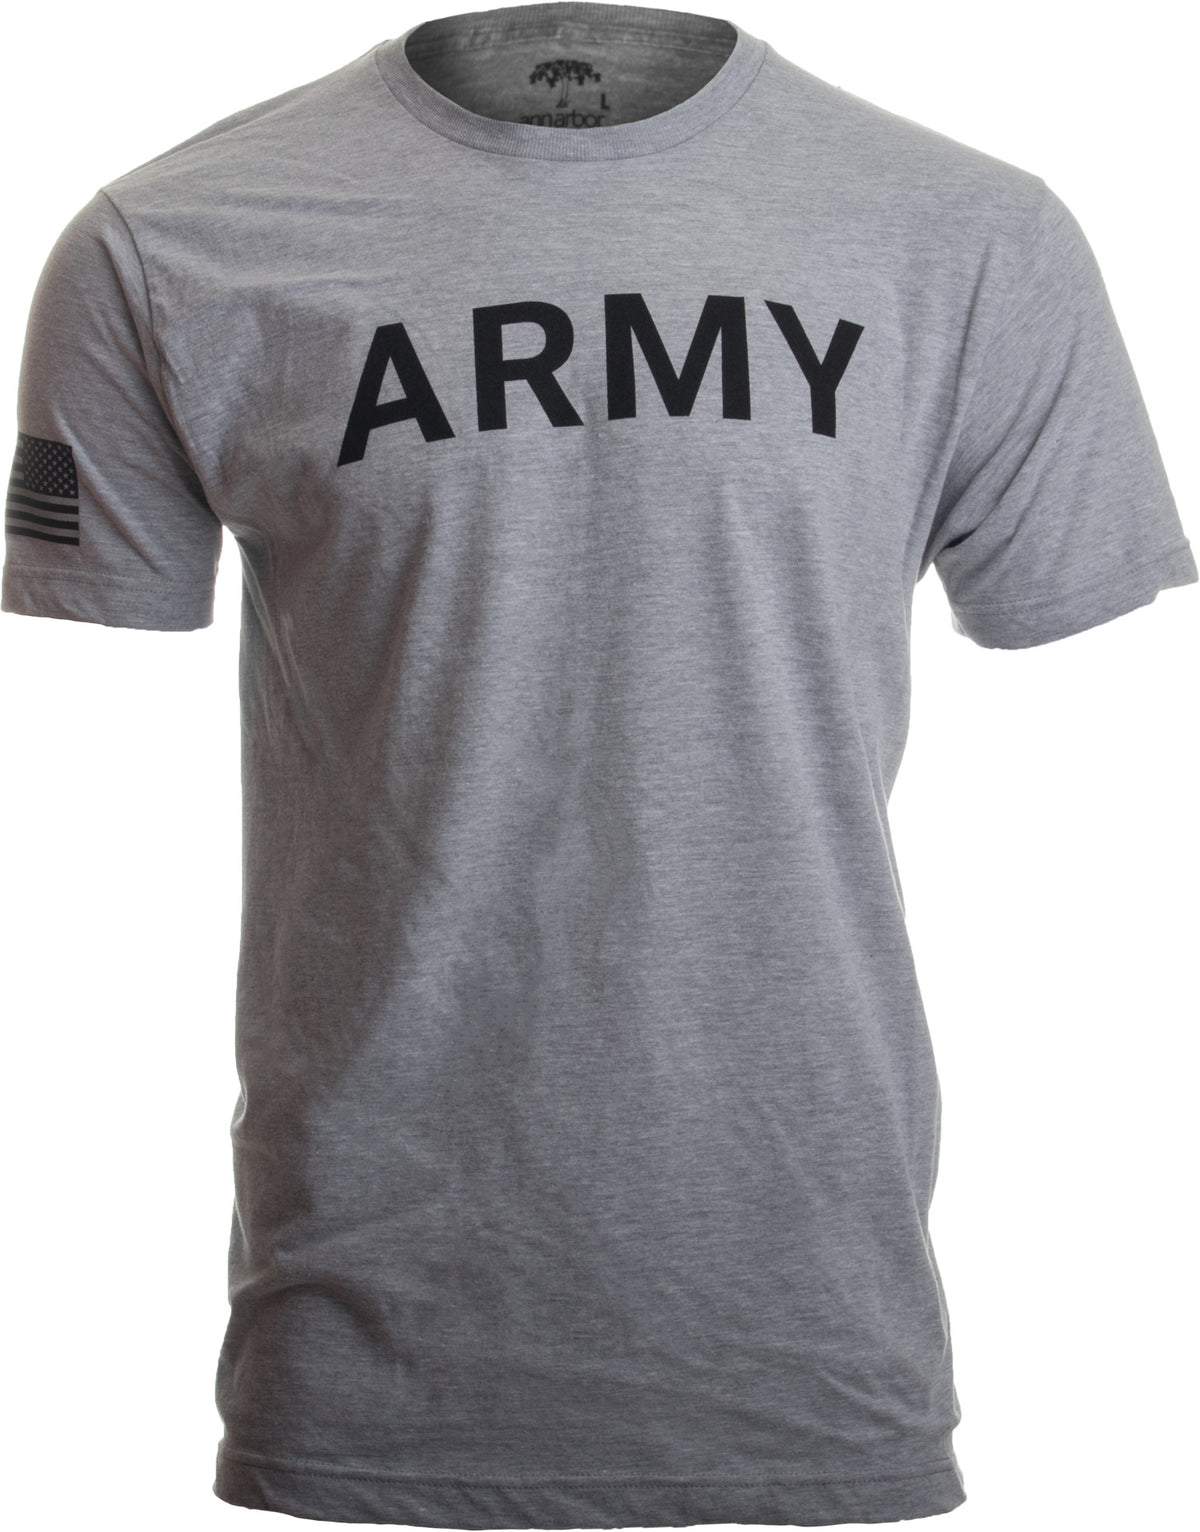 ARMY PT Style Shirt | U.S. Military Physical Traning Infantry Workout T-shirt